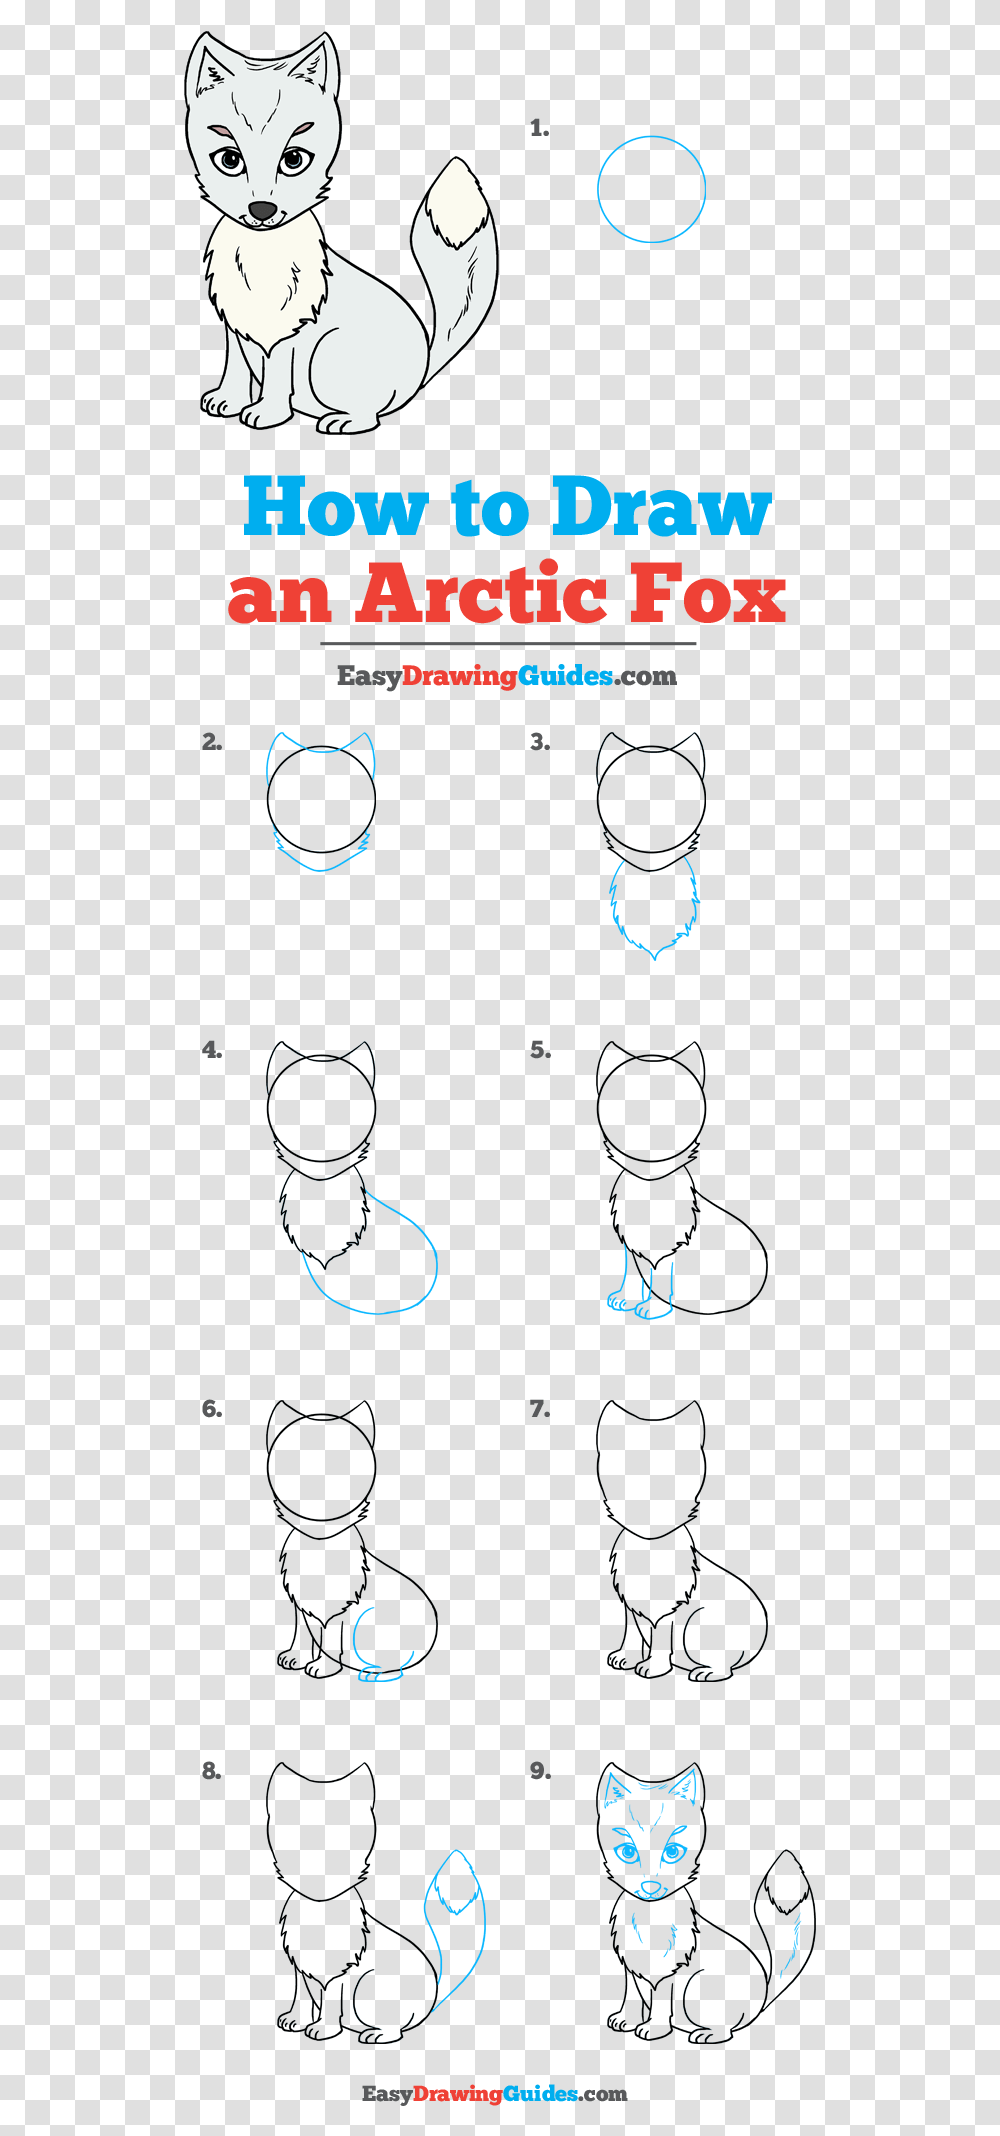 How To Draw Arctic Fox Step By Step How To Draw An Arctic Fox, Accessories, Accessory, Jewelry, Gemstone Transparent Png